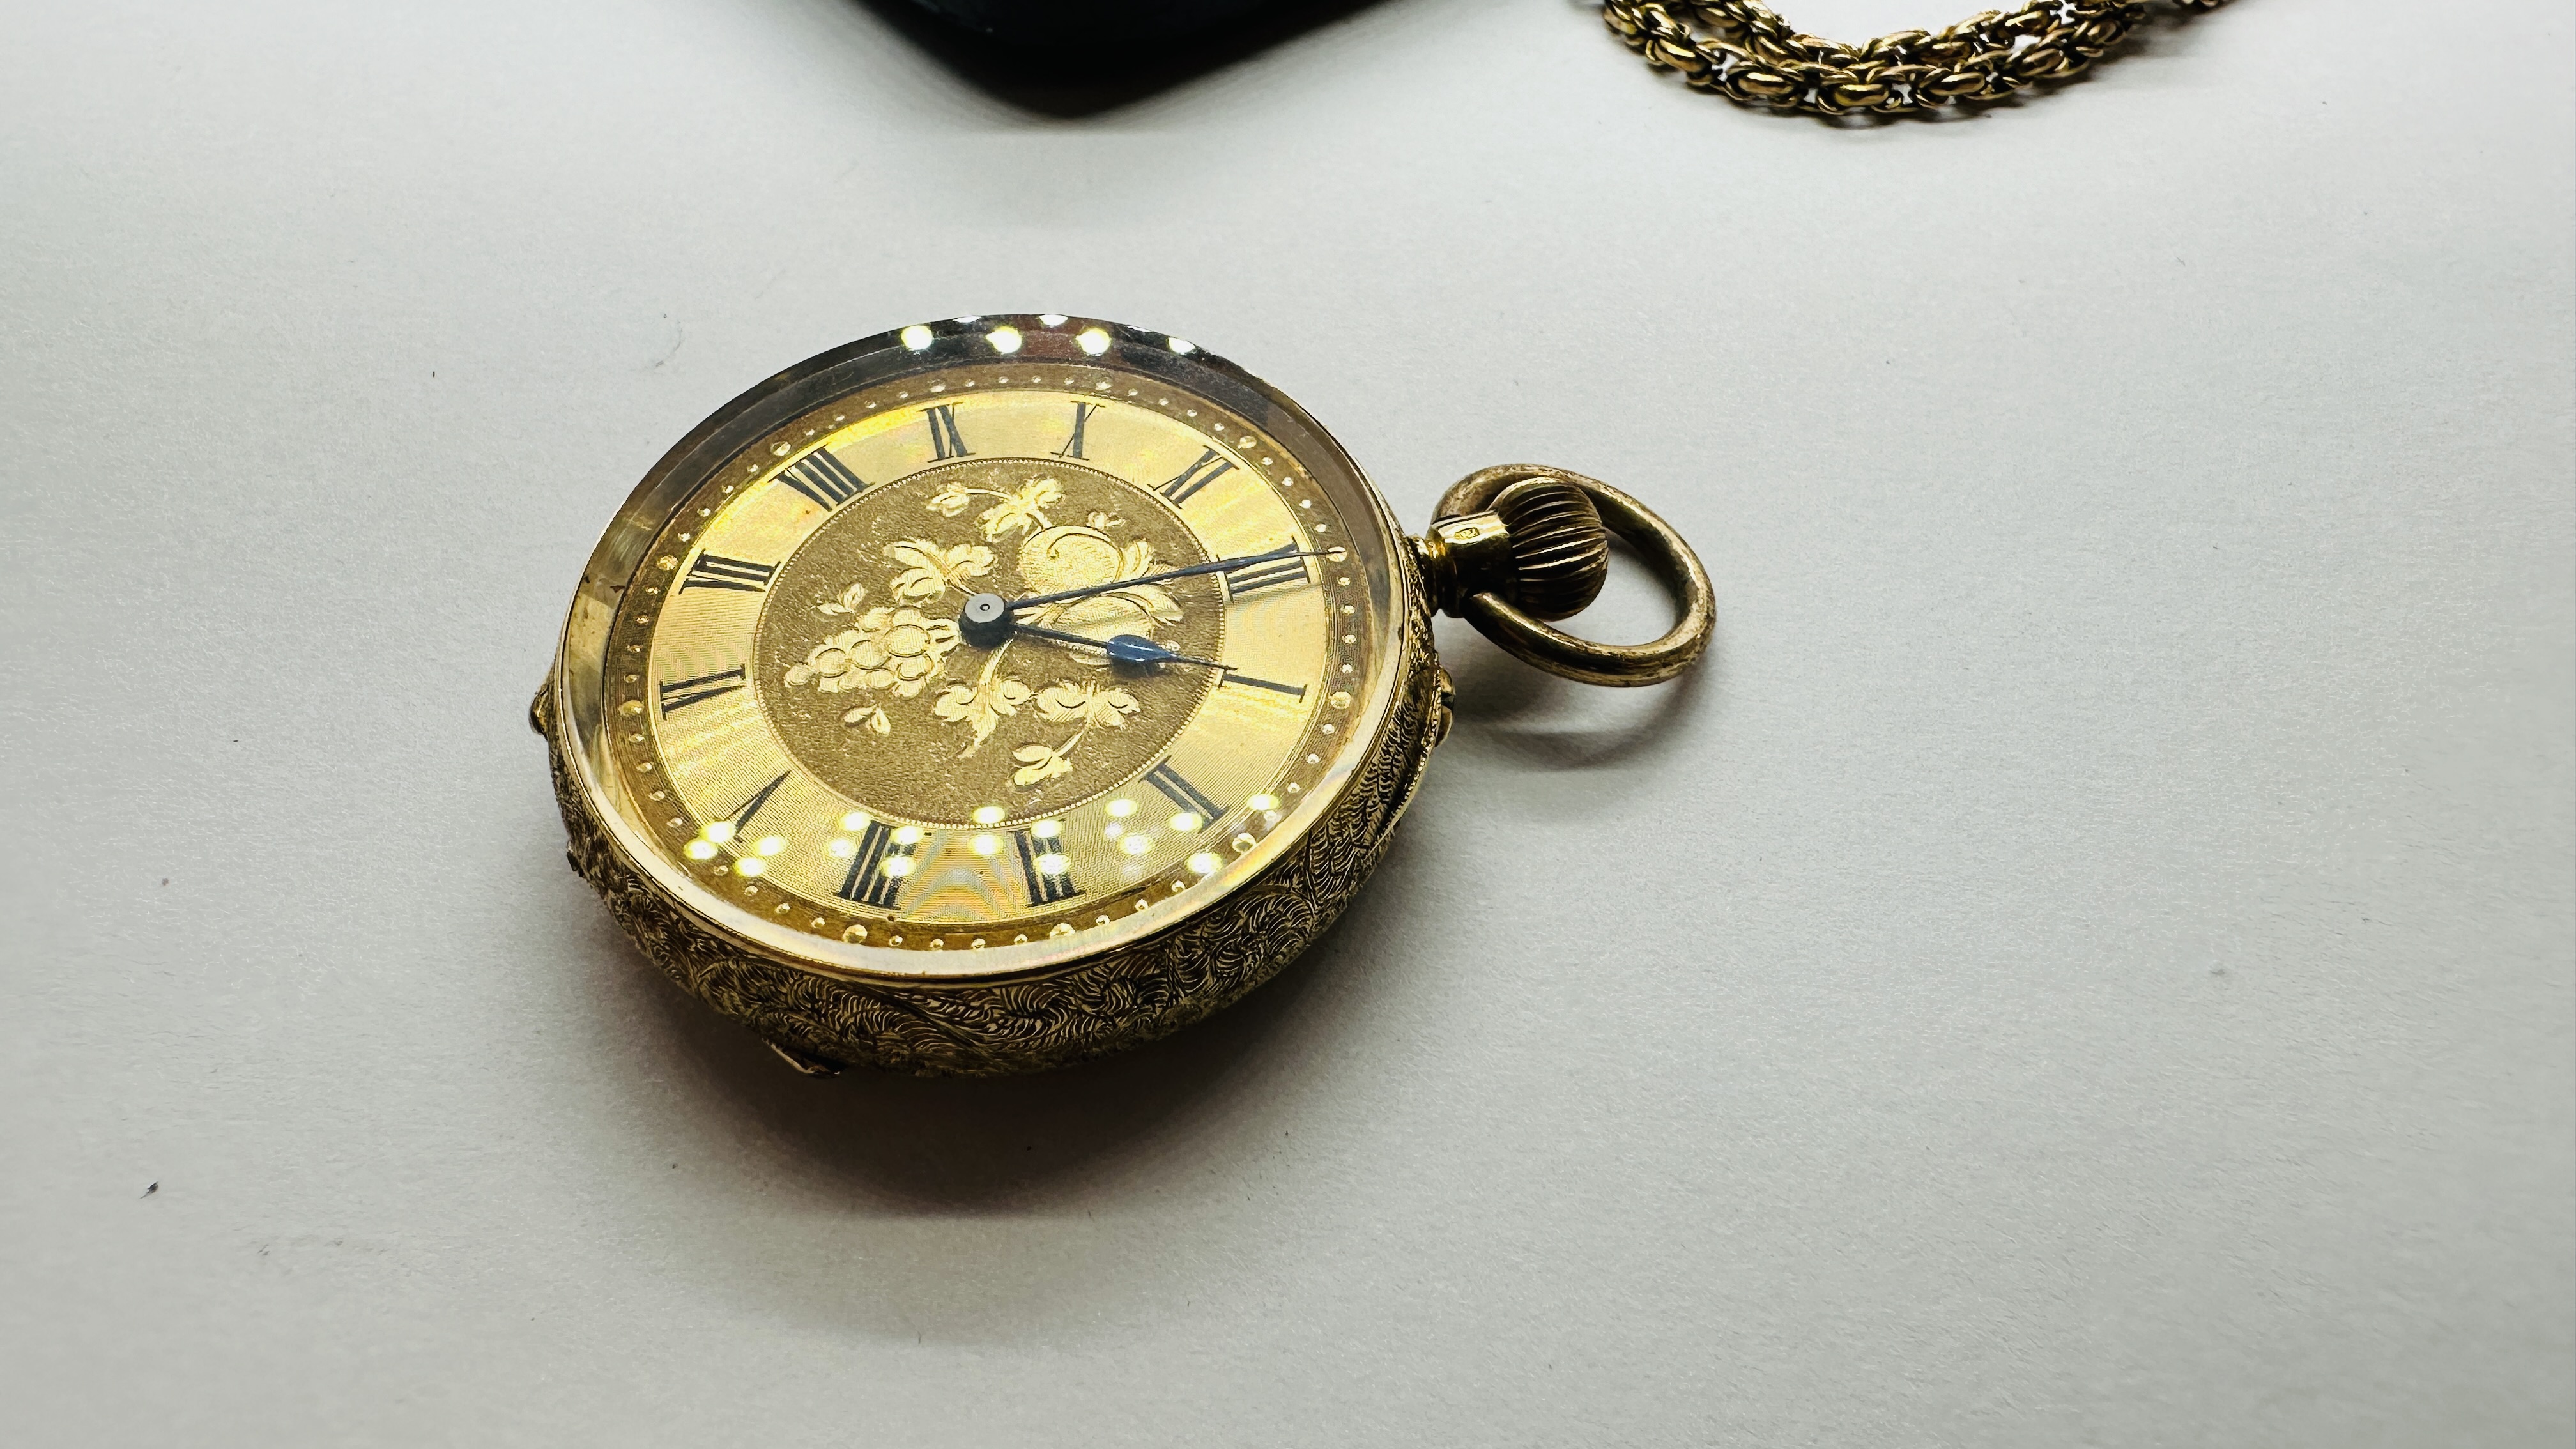 AN ELABORATE ANTIQUE 18CT GOLD CASED HALF HUNTER POCKET WATCH ALONG WITH A WOVEN WATCH CHAIN, - Image 15 of 17